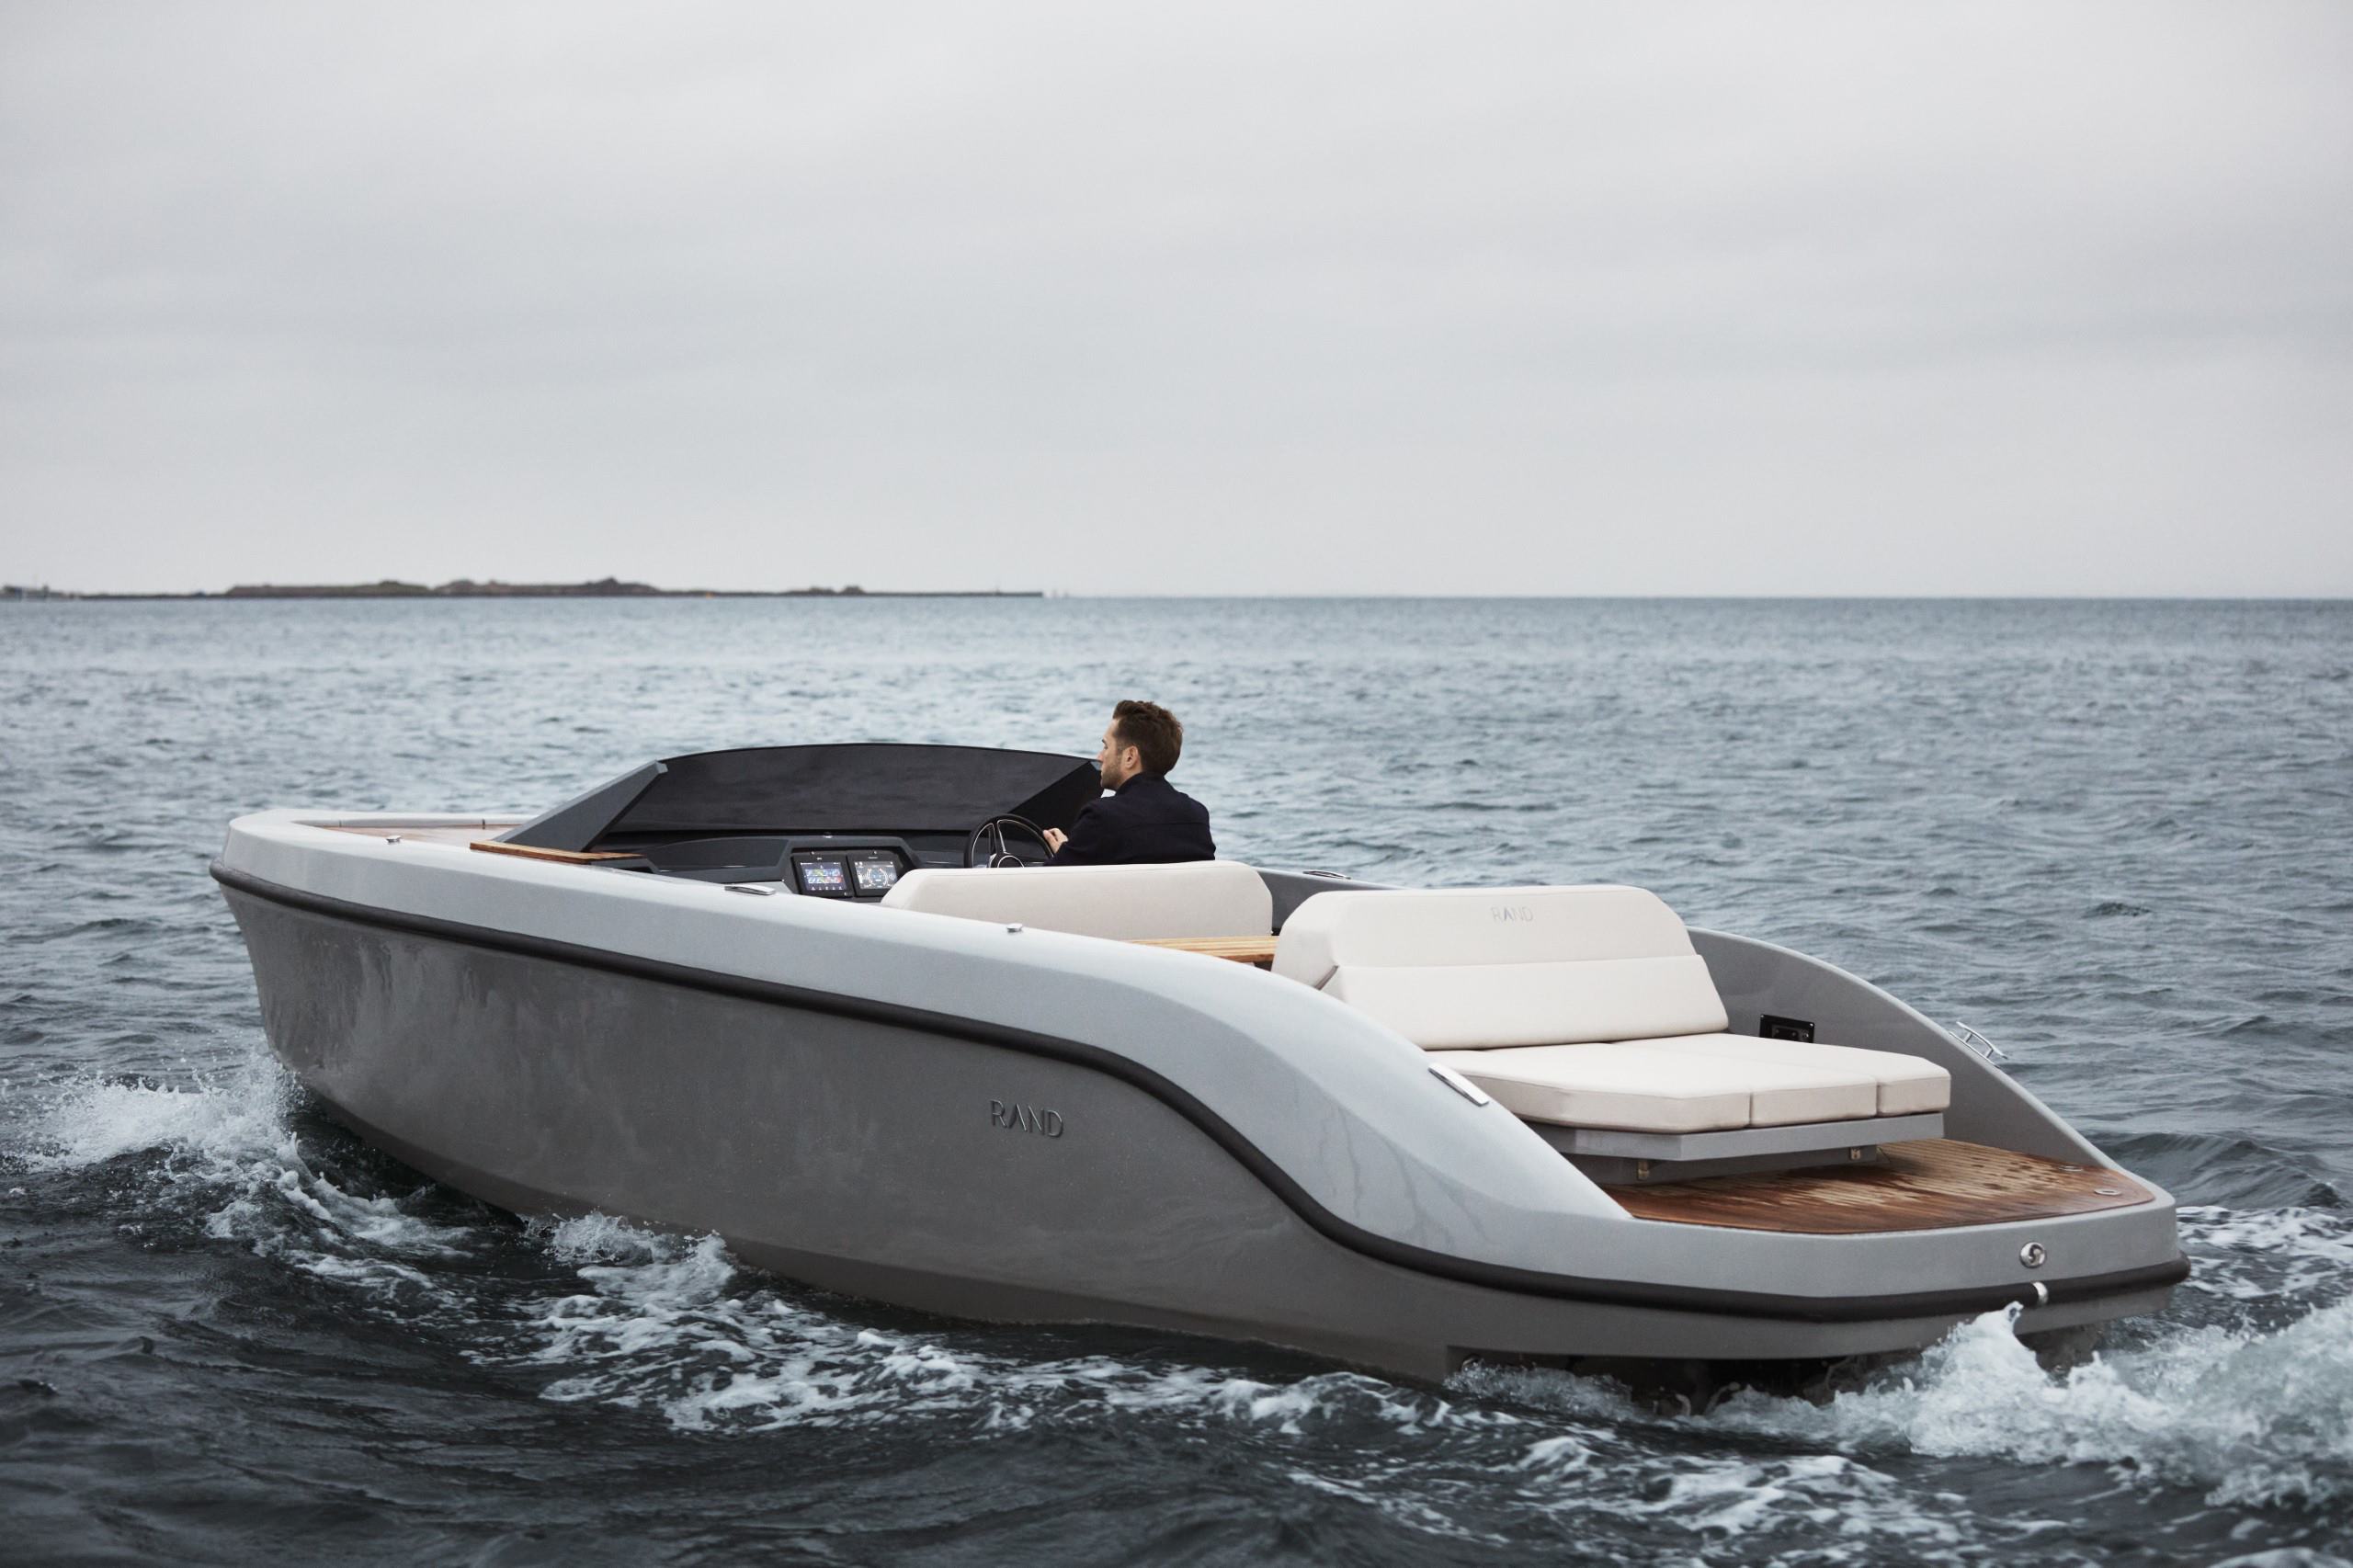 New Electric Boat Launched By Rand Boats